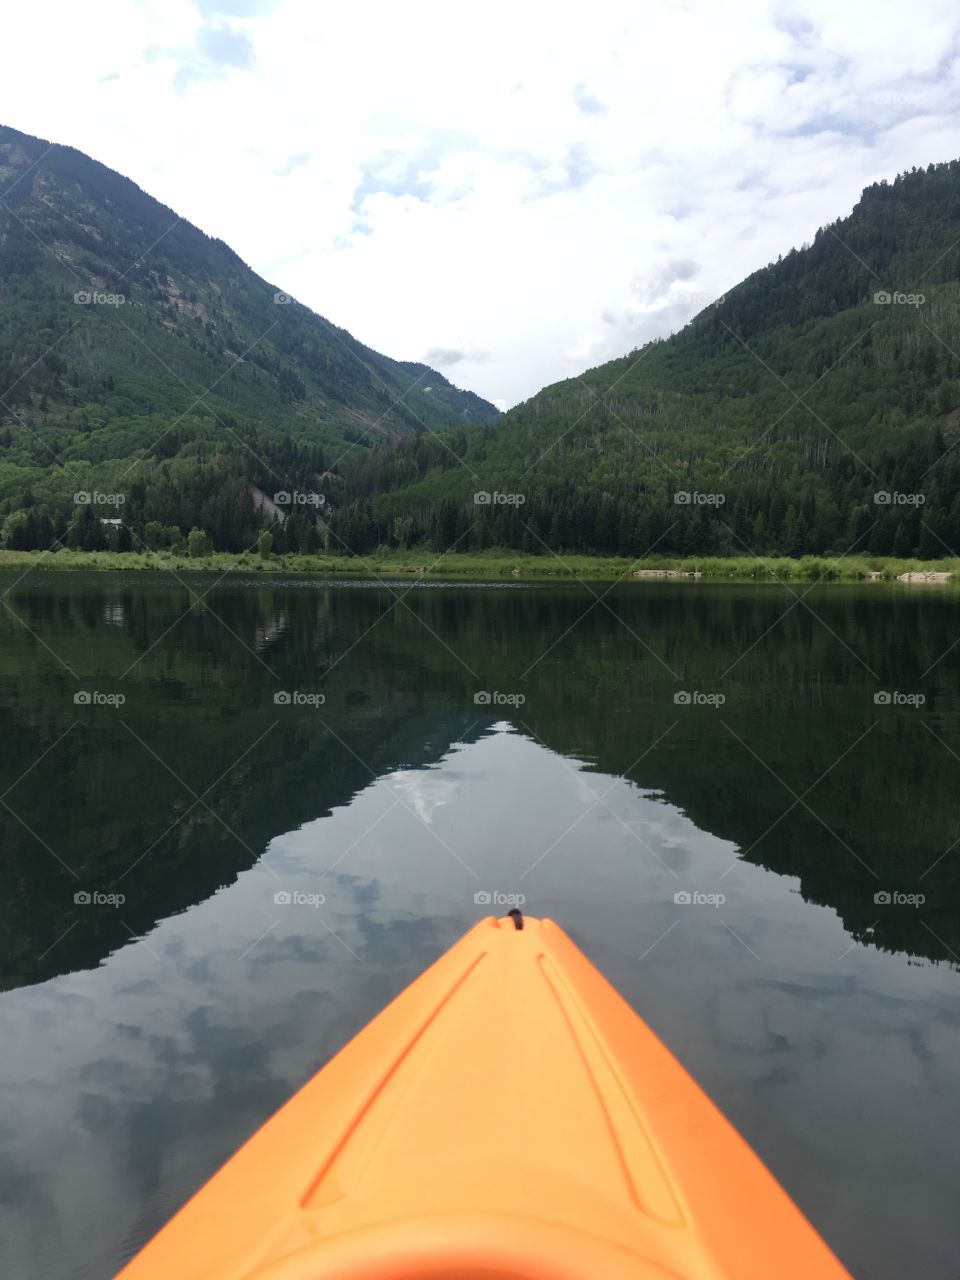 Kayaking on a calm mountain lake repeating shapes of the kayak, reflection in the water & mountain valley to add interest.